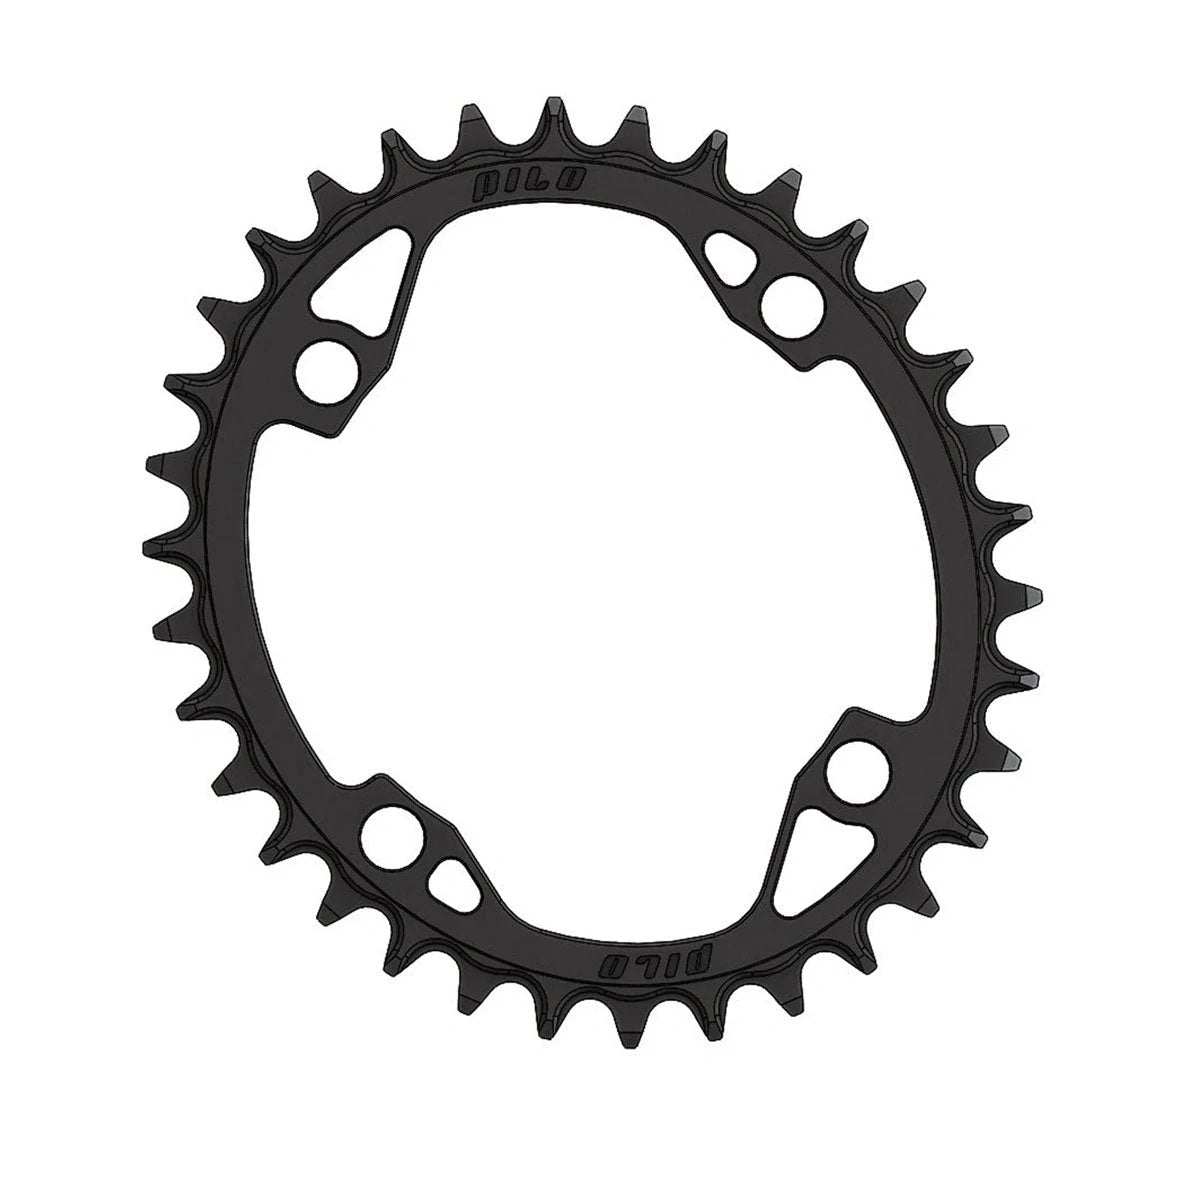 Pilo 34T Chainring For Cranks - Replacement Chain Rings